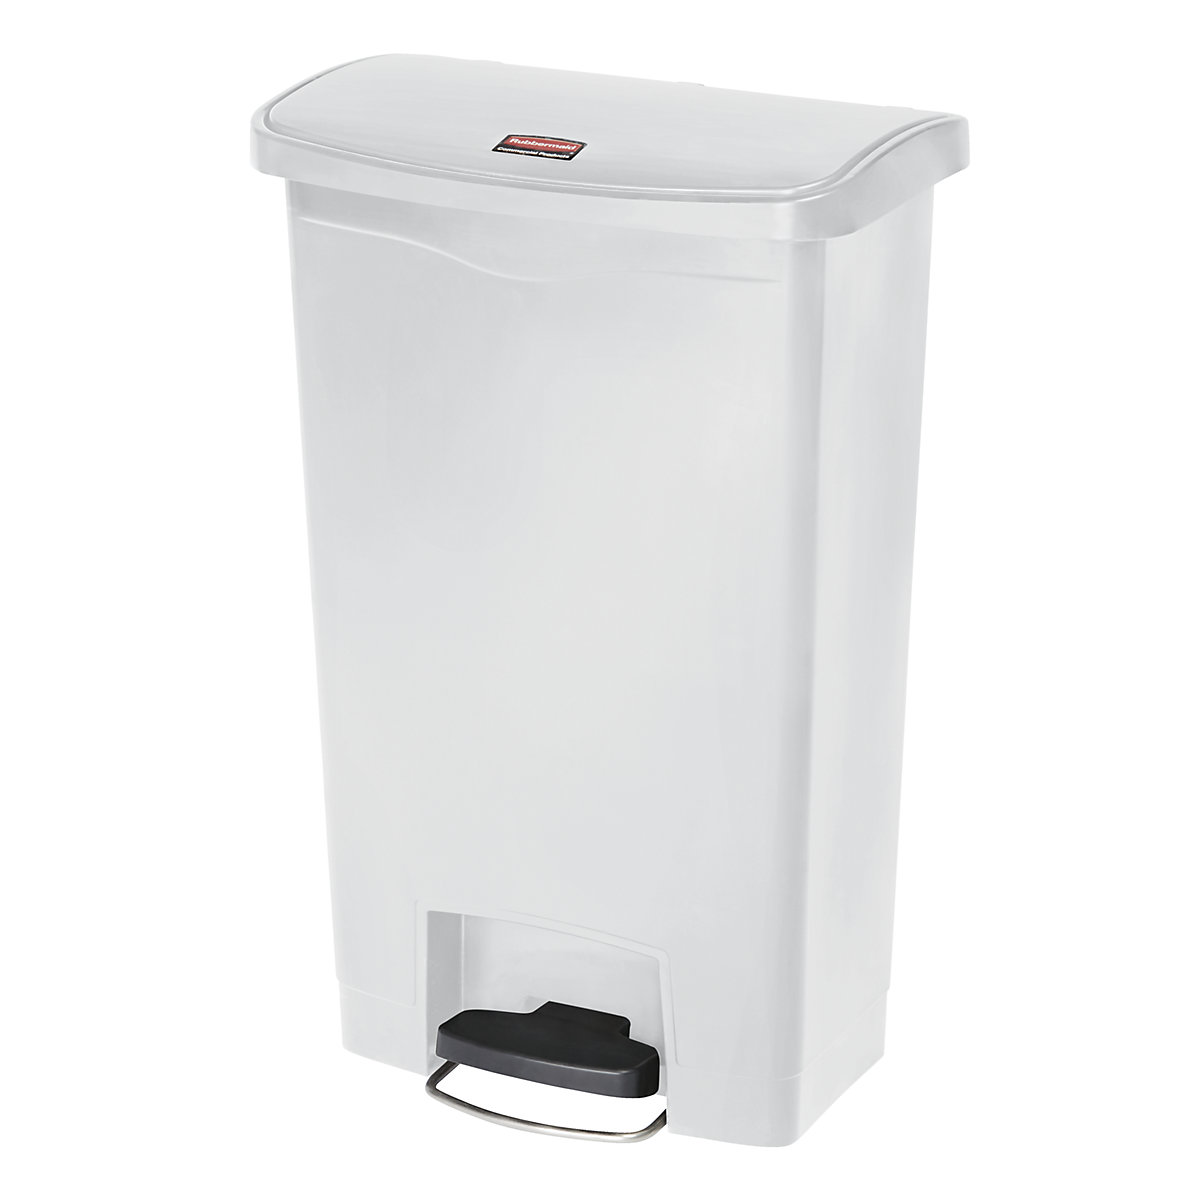 SLIM JIM® waste collector with pedal – Rubbermaid